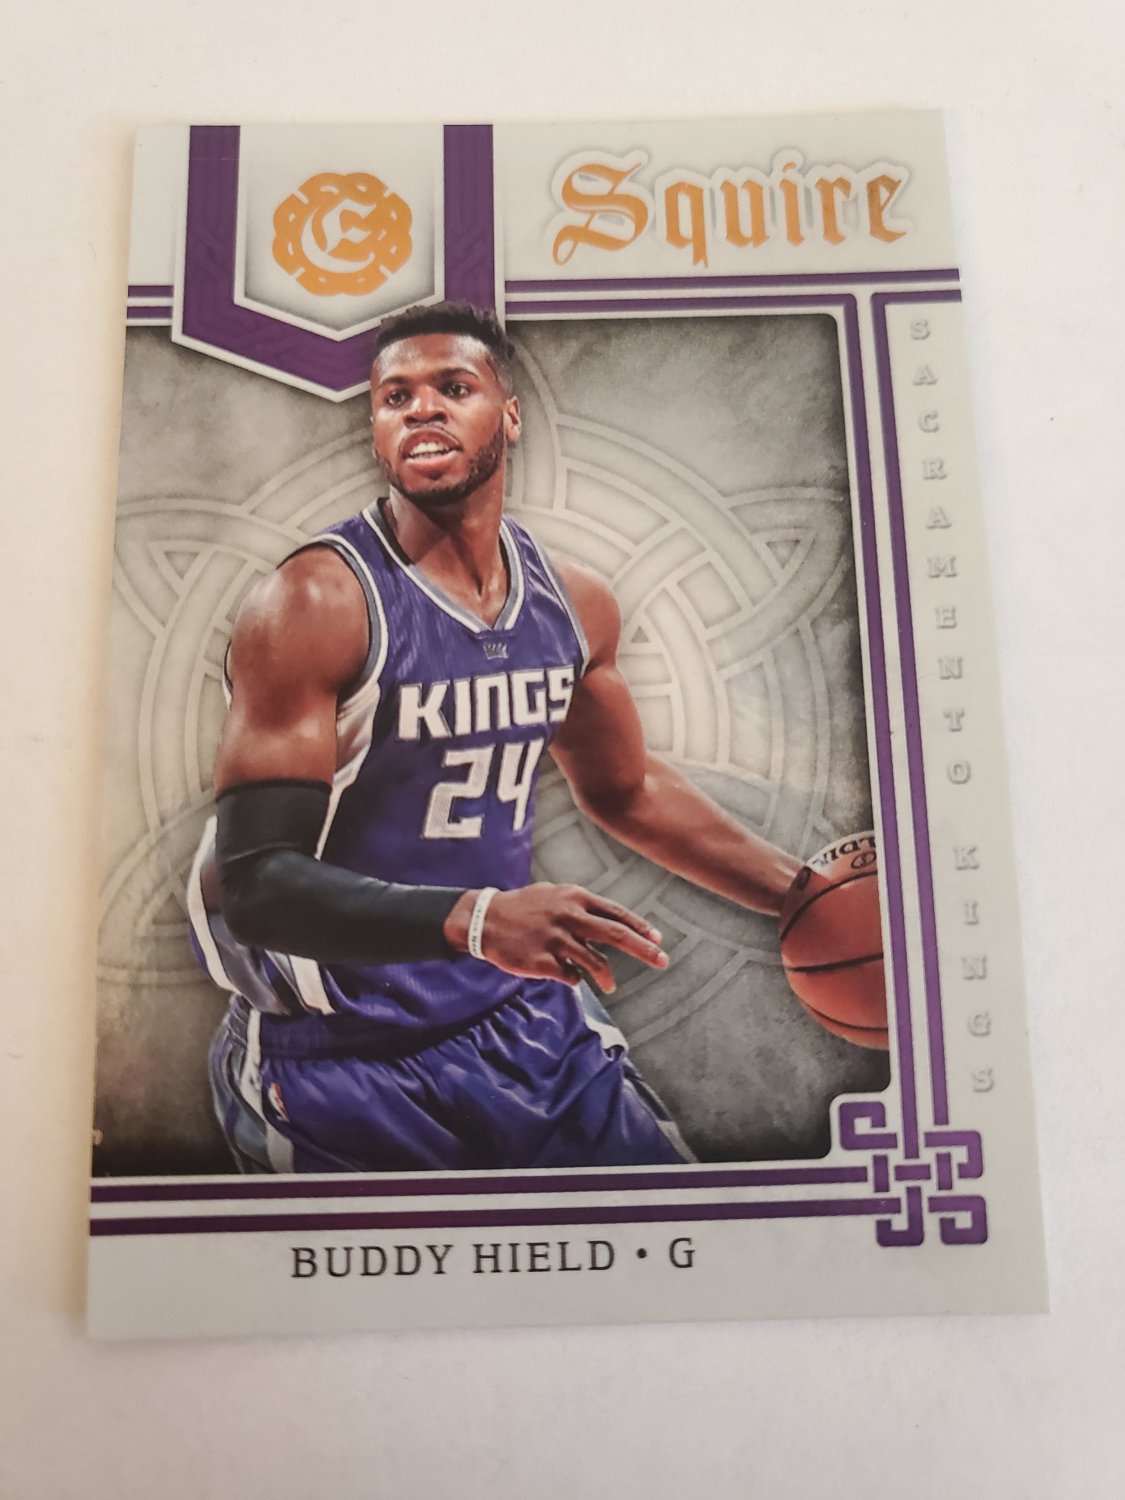 Buddy Hield 2016-17 Excalibur Squire Insert Card